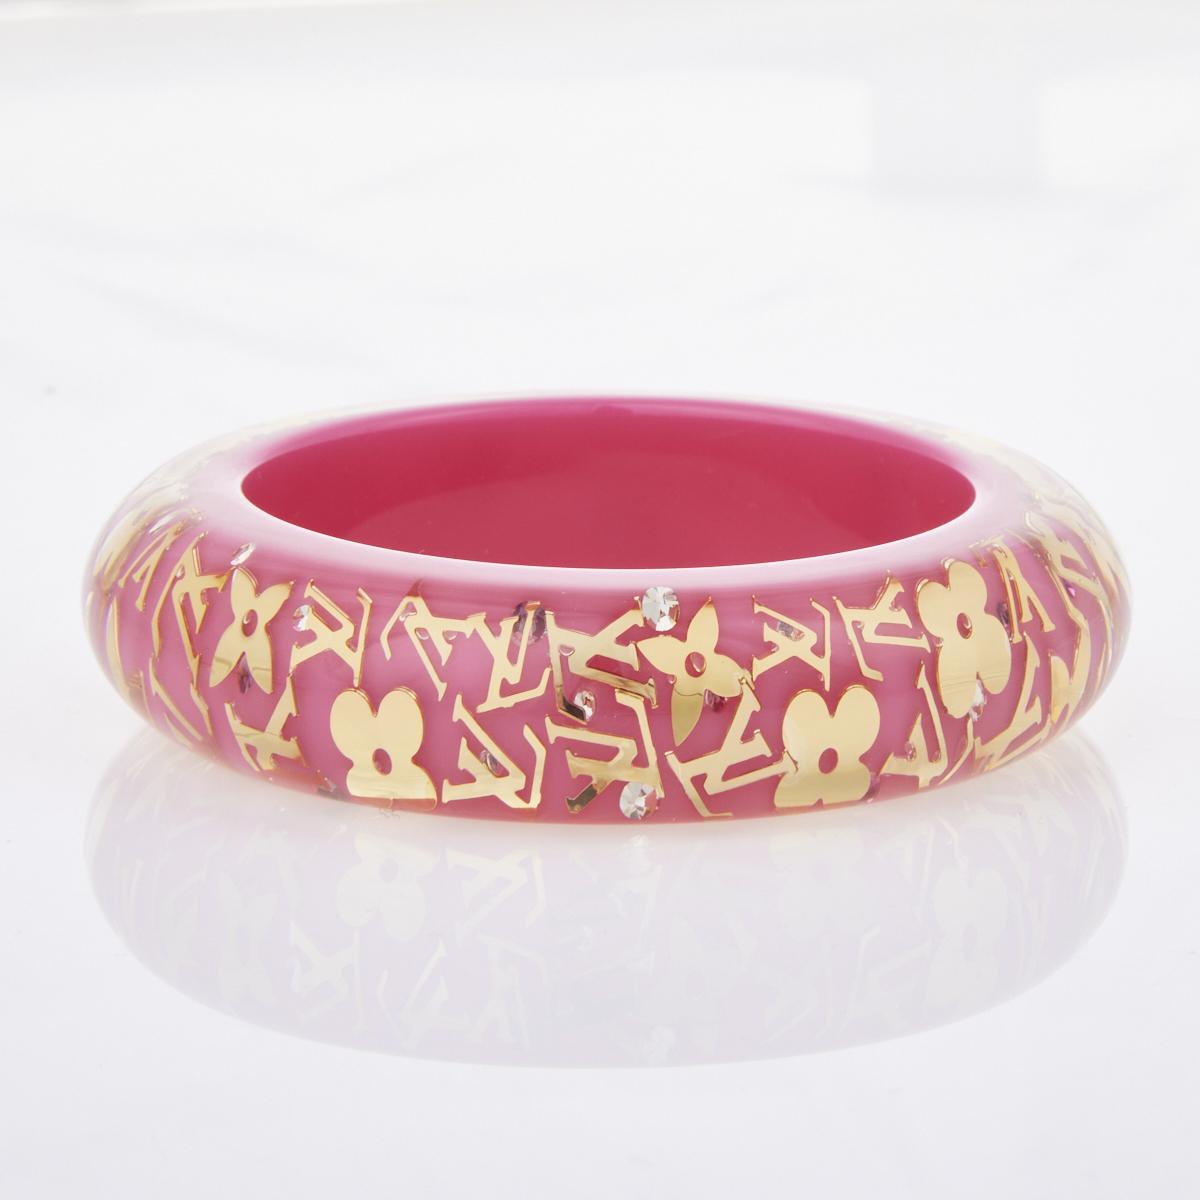 Louis Vuitton Resin Inclusion Bangle with Box